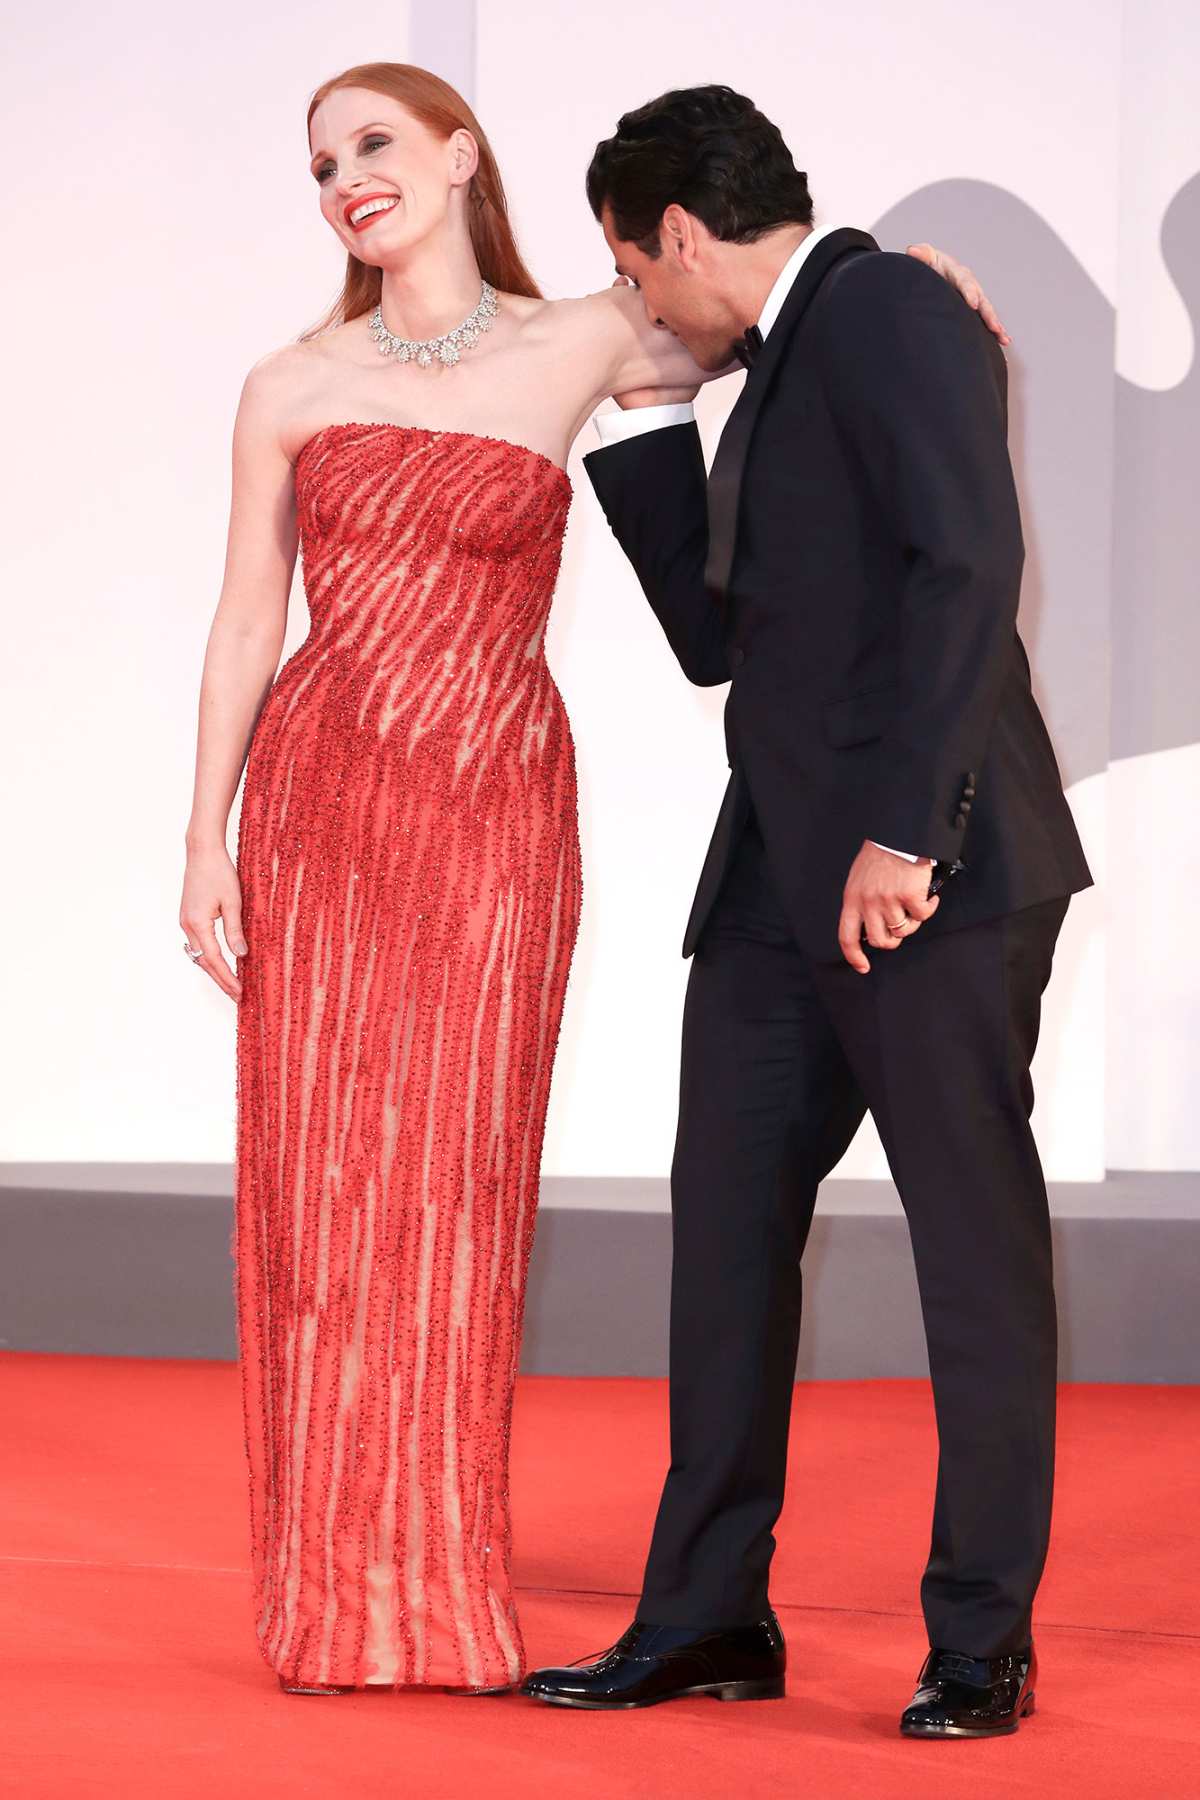 Jessica Chastain Reacts To Video Of Oscar Isaac Smelling Her Arm